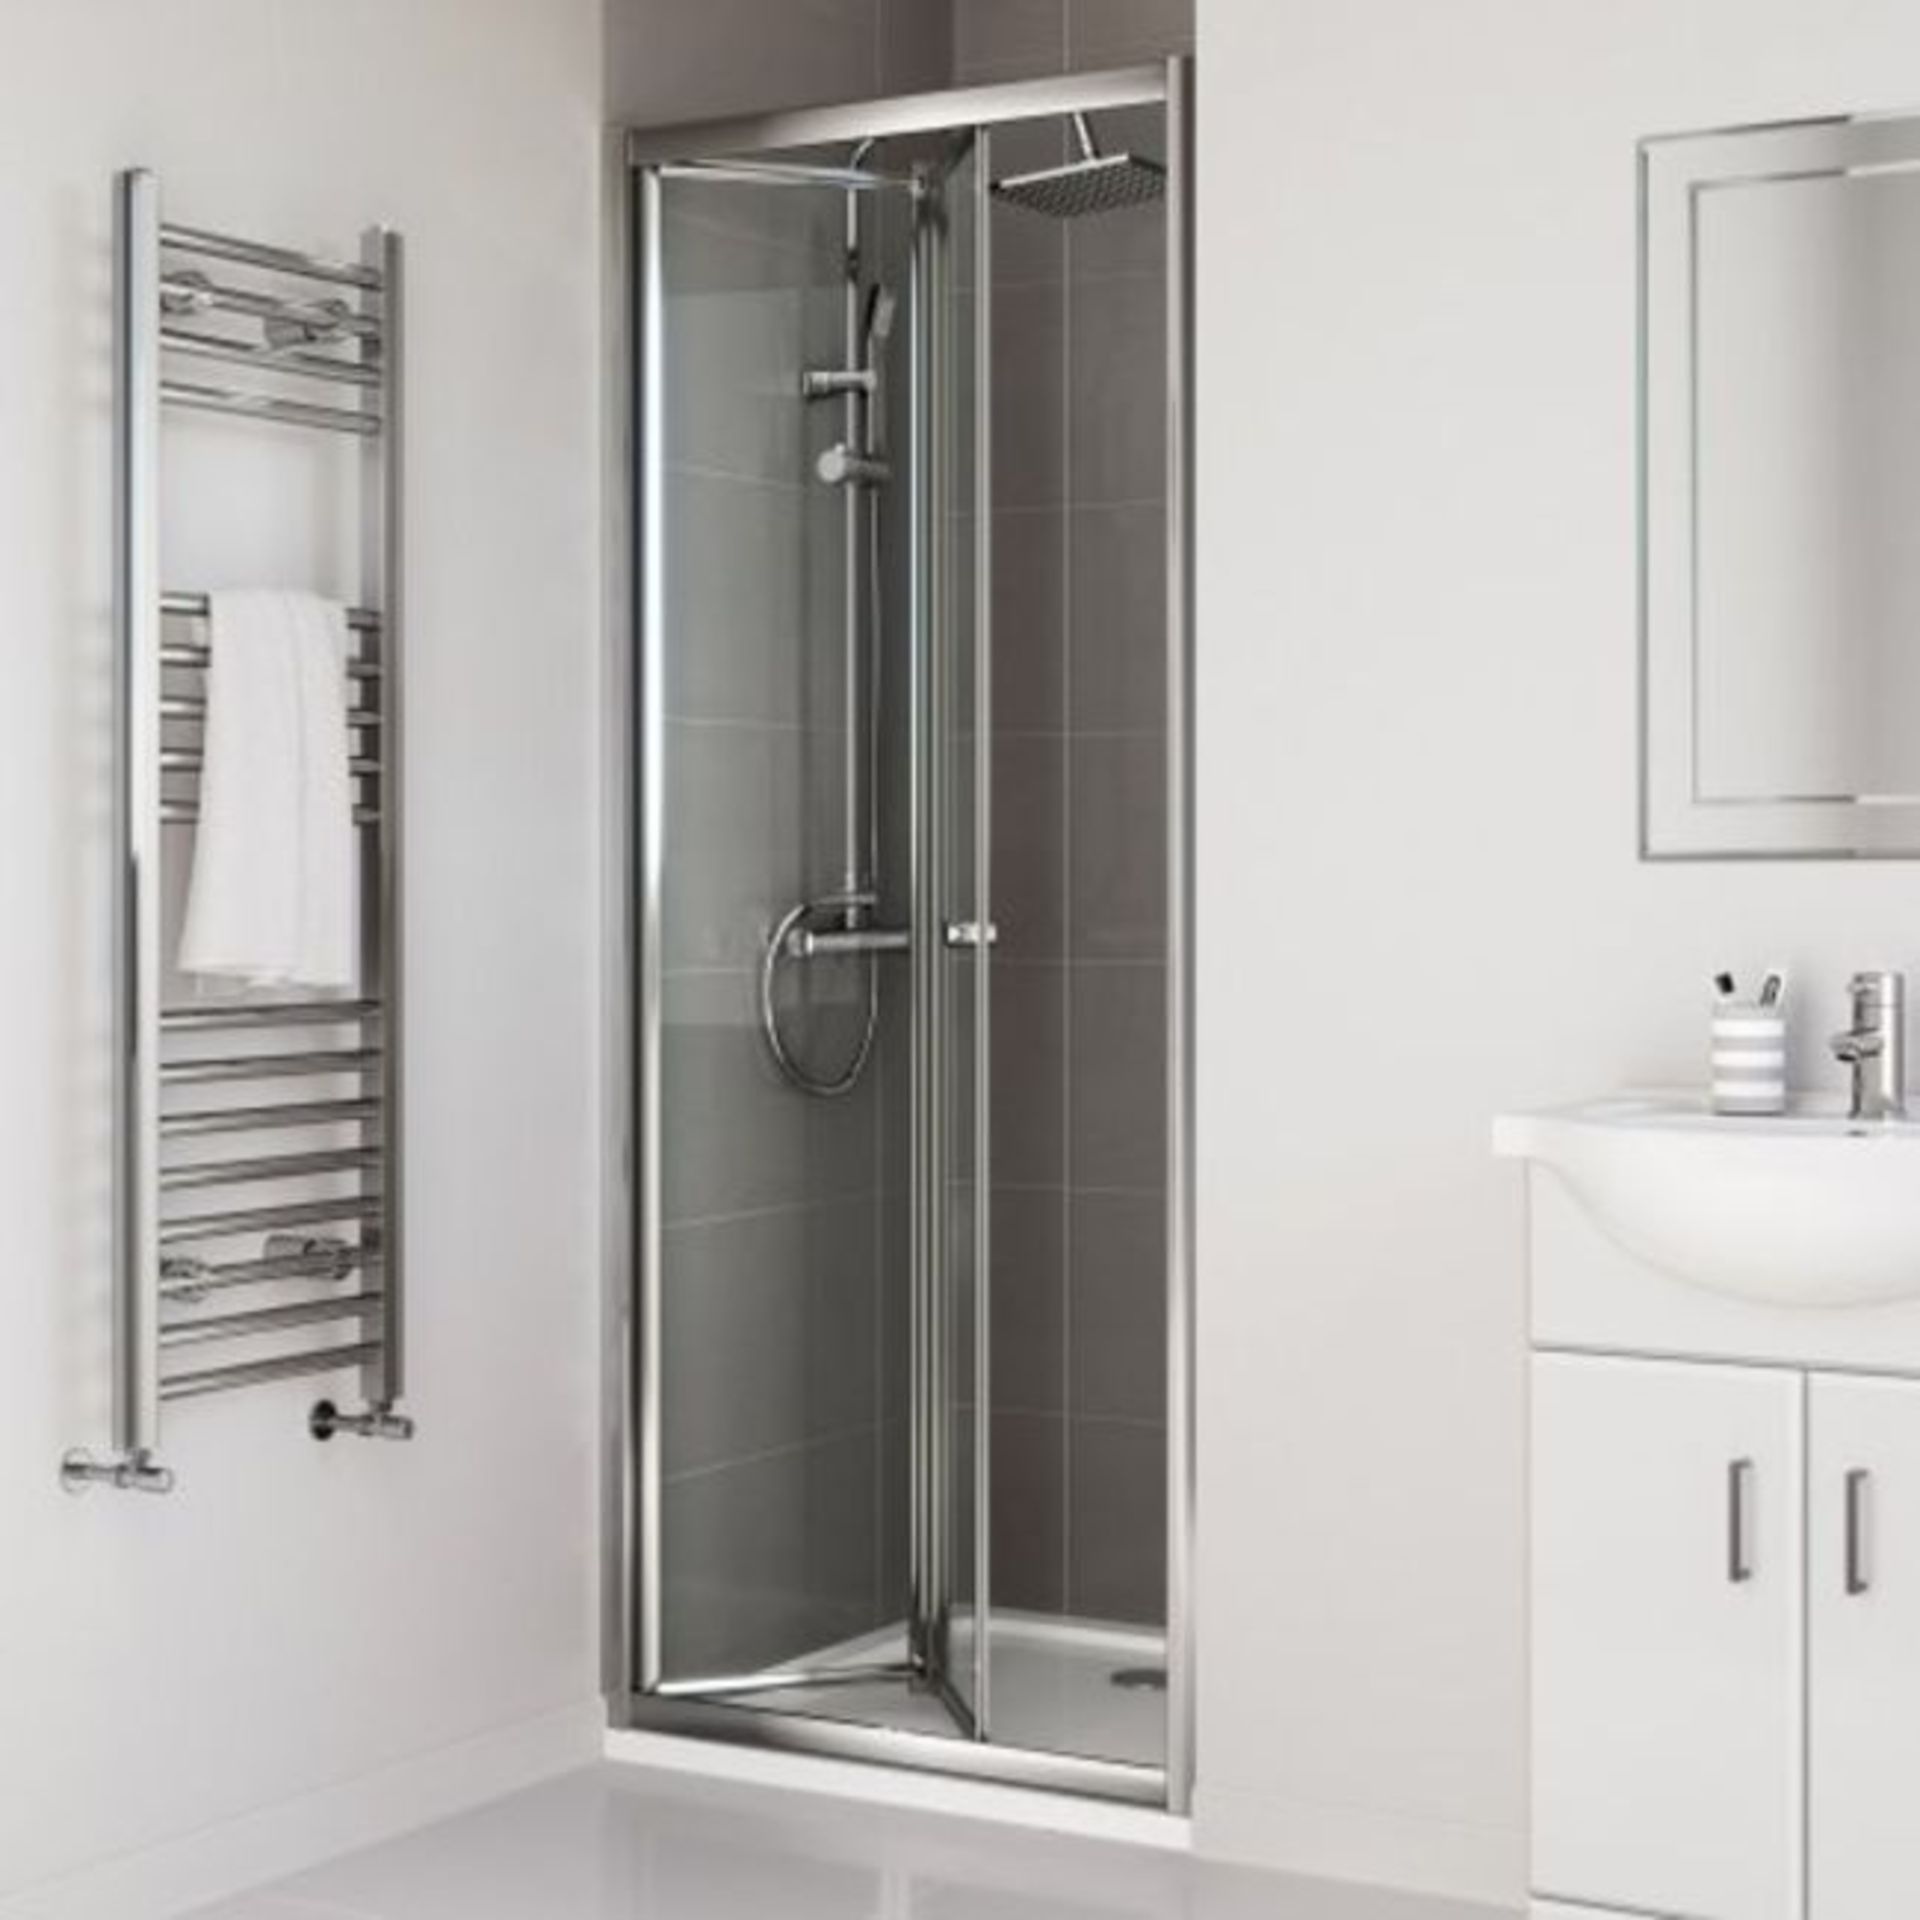 New (E52) 760mm - Elements Bi Fold Shower Door. RRP £299.99. Do You Have An Awkward Nook Or - Image 2 of 3